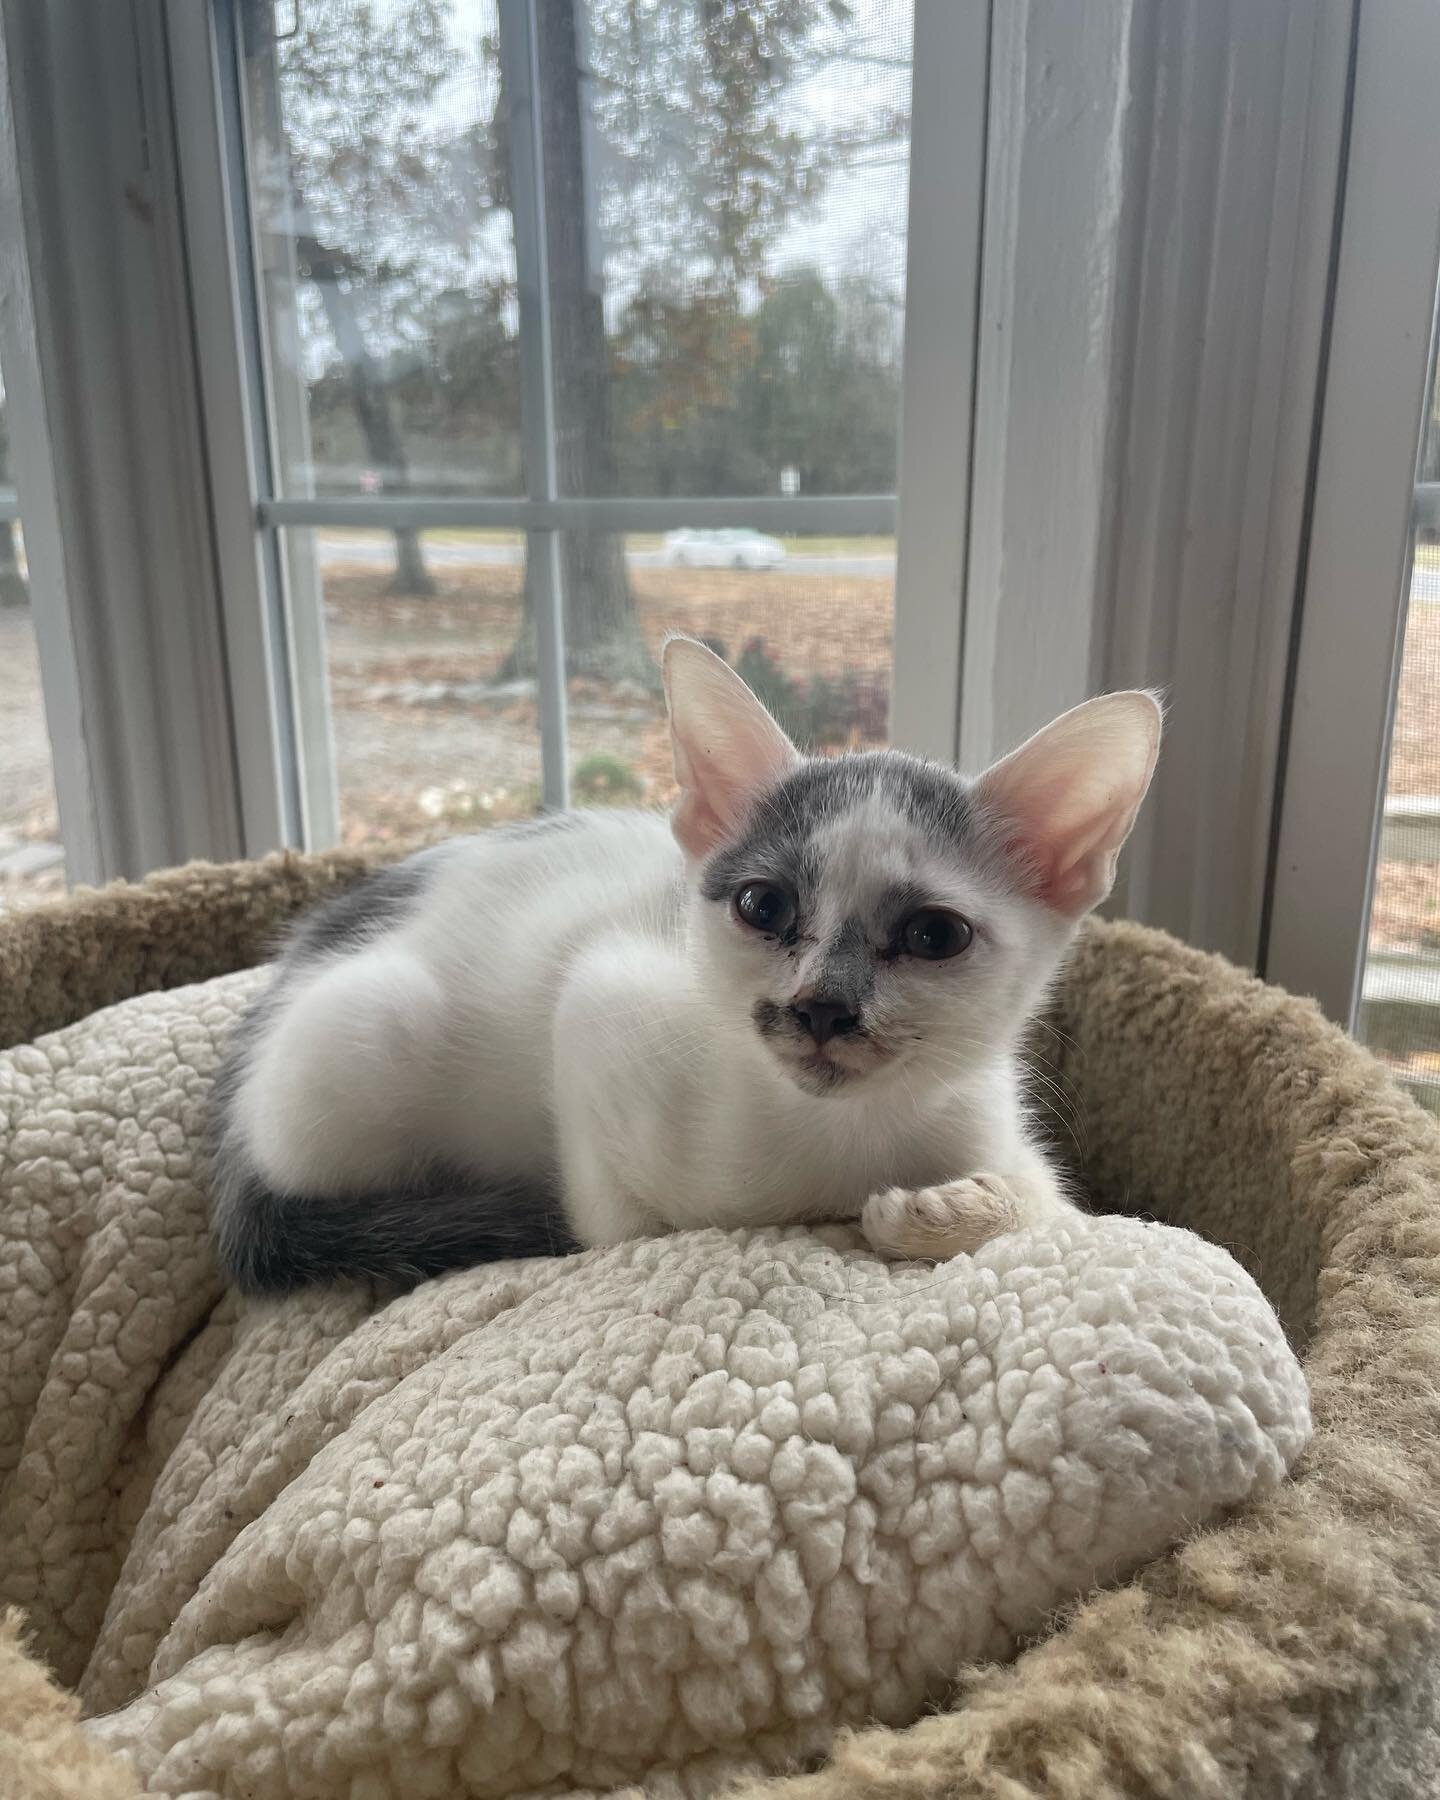 This morning we are heartbroken over the loss of our sweet Pinto. Pinto was brought to the rescue with her siblings when she was only a few weeks old and she spent the past 11 weeks as a part of the CVRS family. She was the runt of her litter and muc